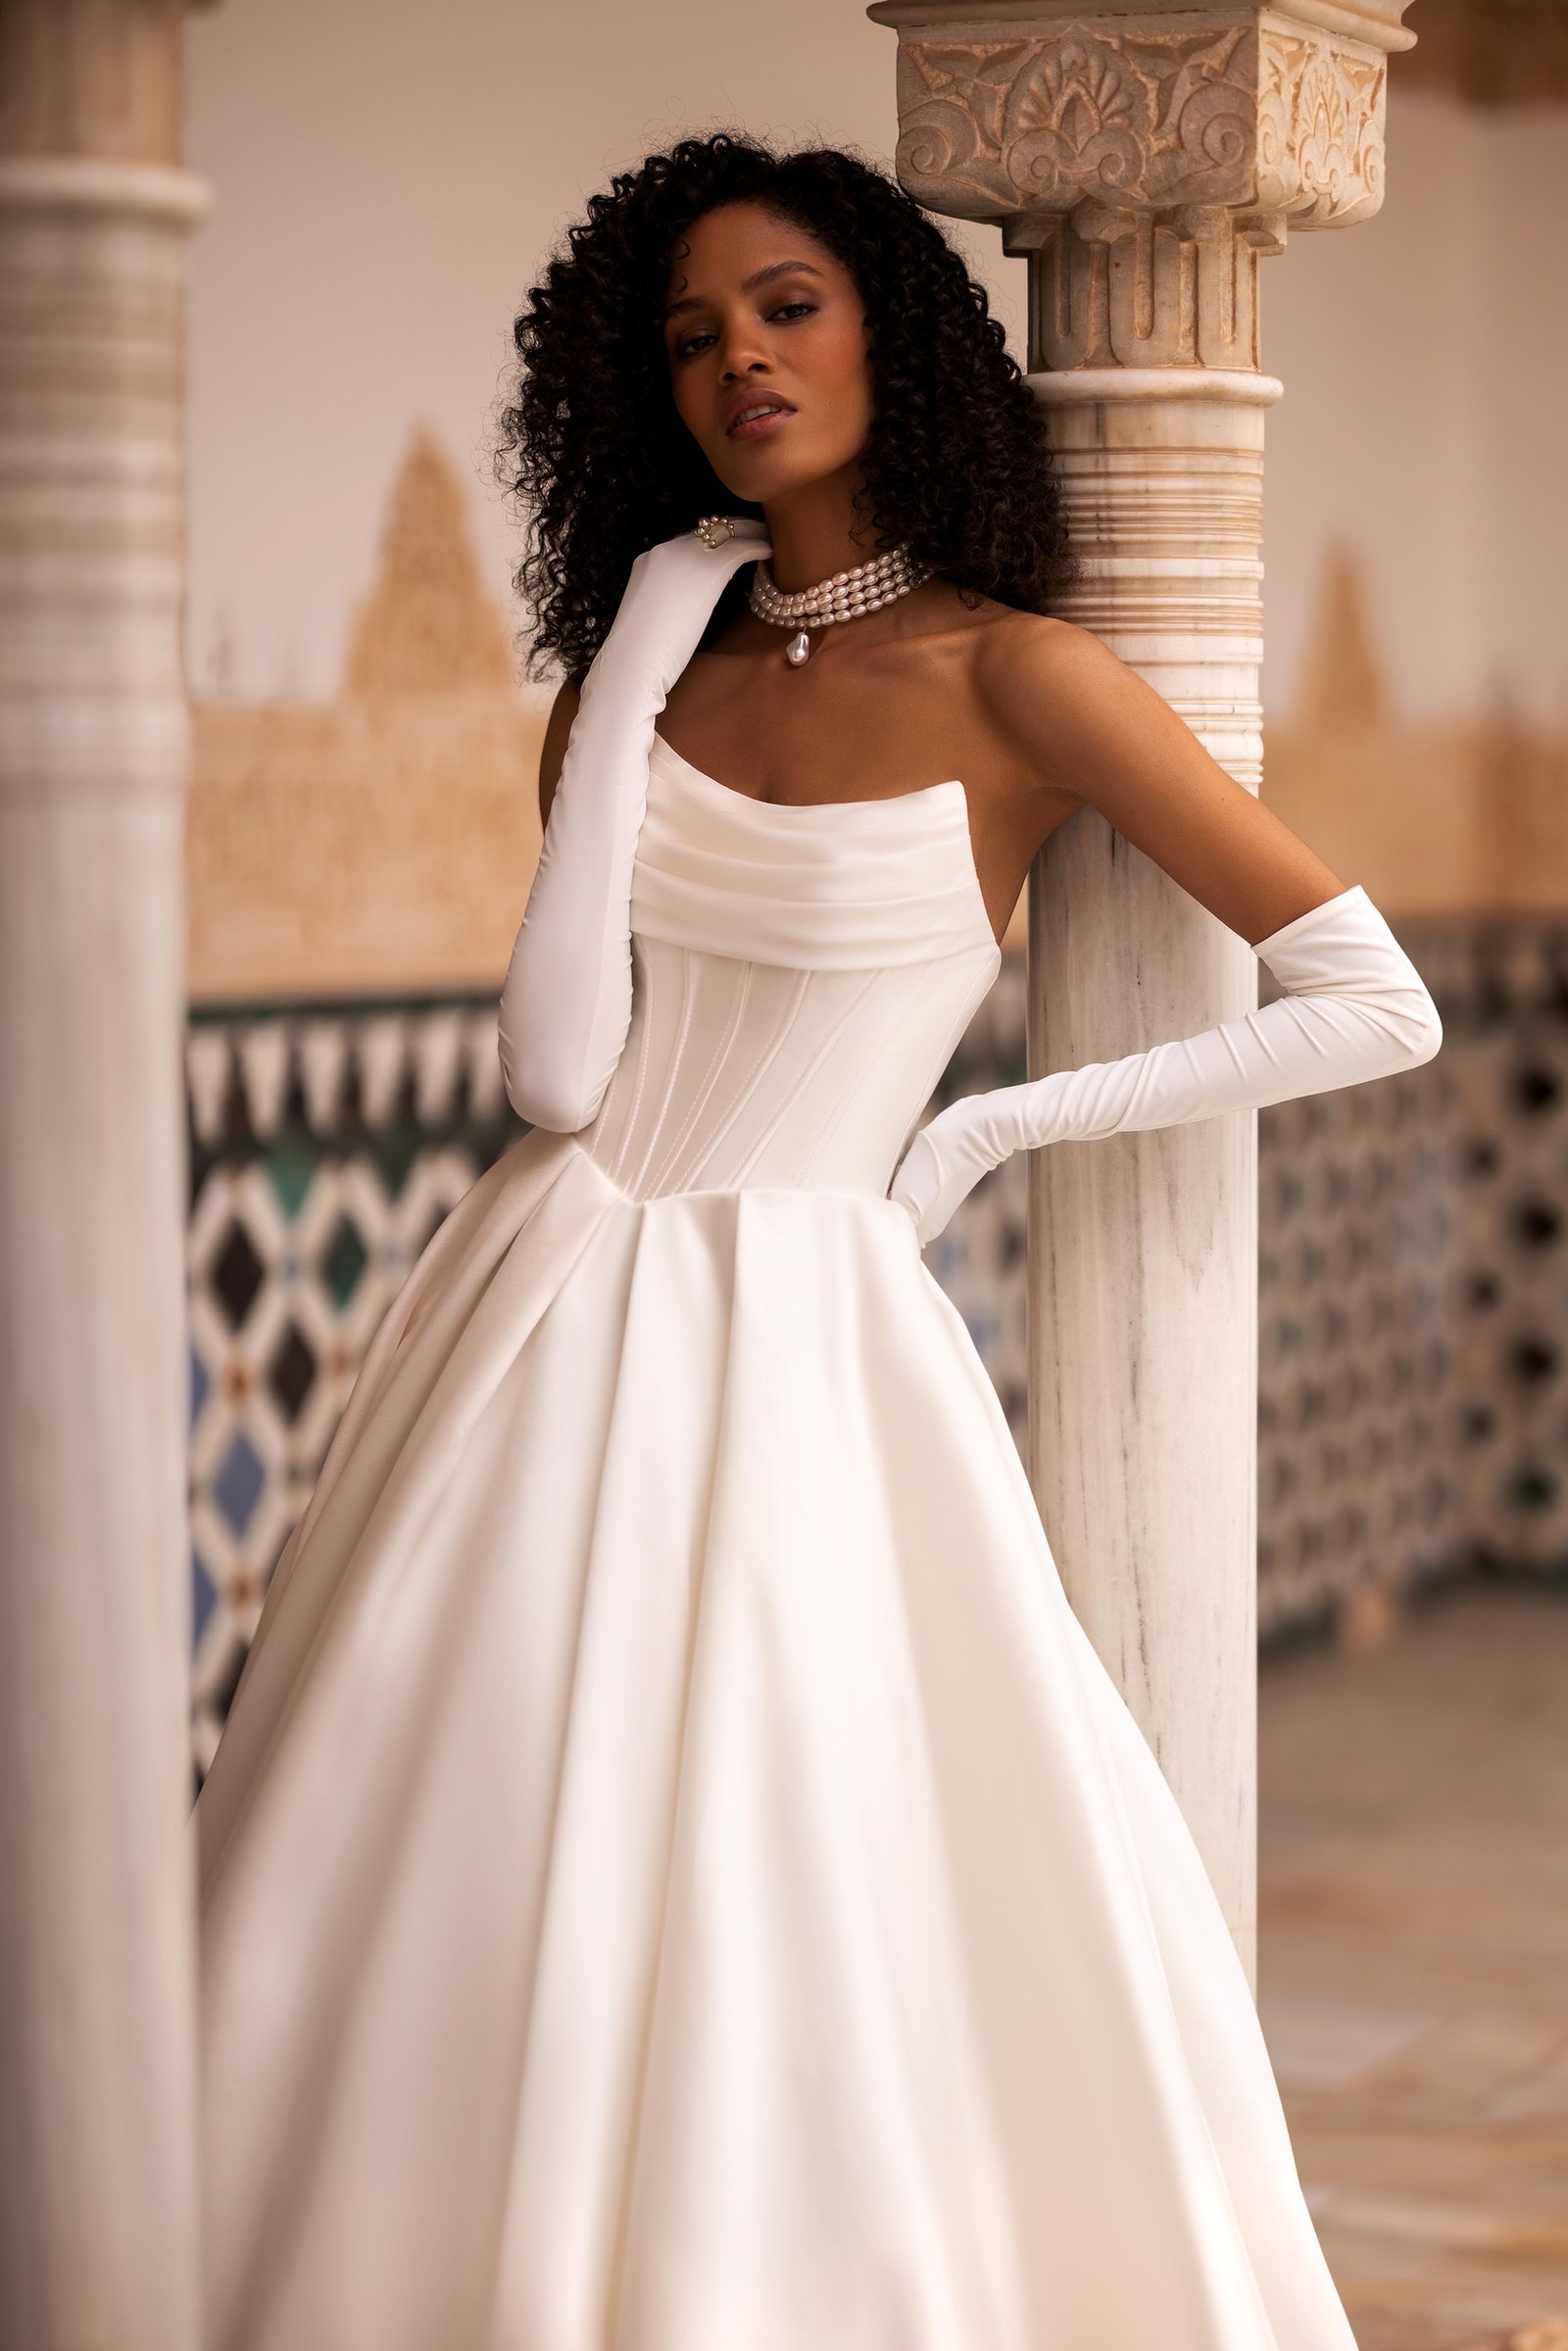 Odette 2 dress by wona concept from alma de oro collection